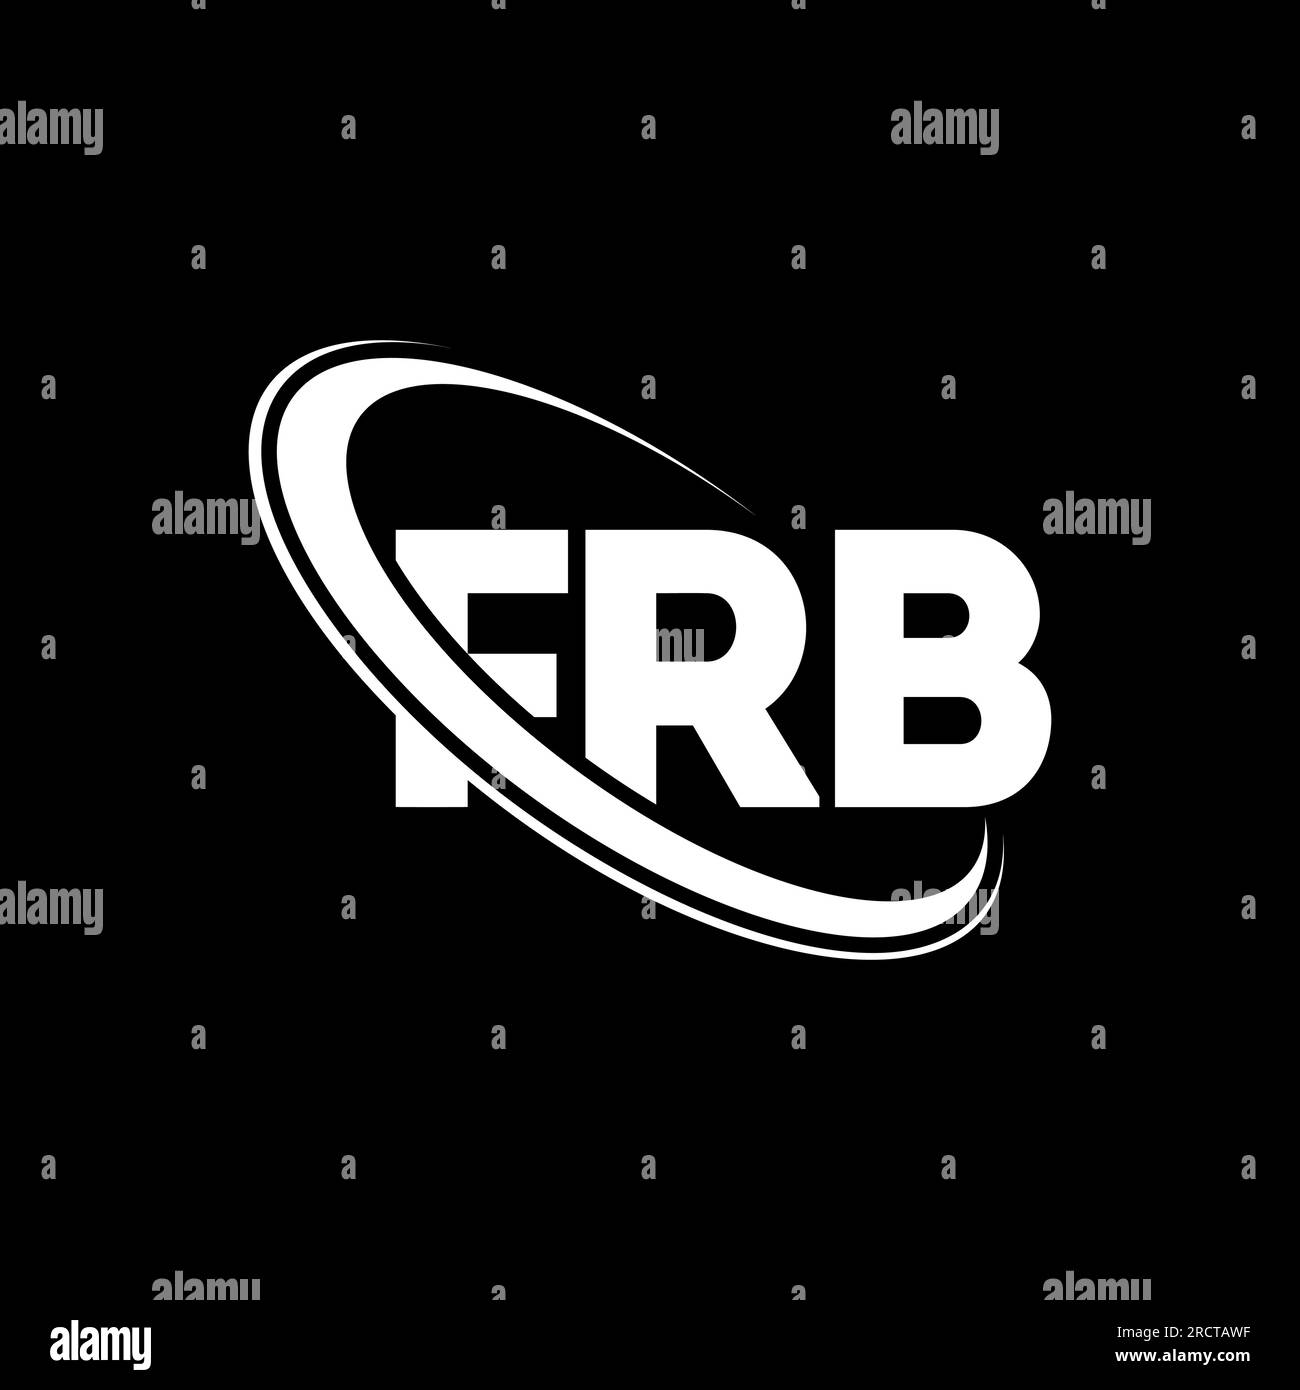 FRB logo. FRB letter. FRB letter logo design. Initials FRB logo linked with circle and uppercase monogram logo. FRB typography for technology, busines Stock Vector